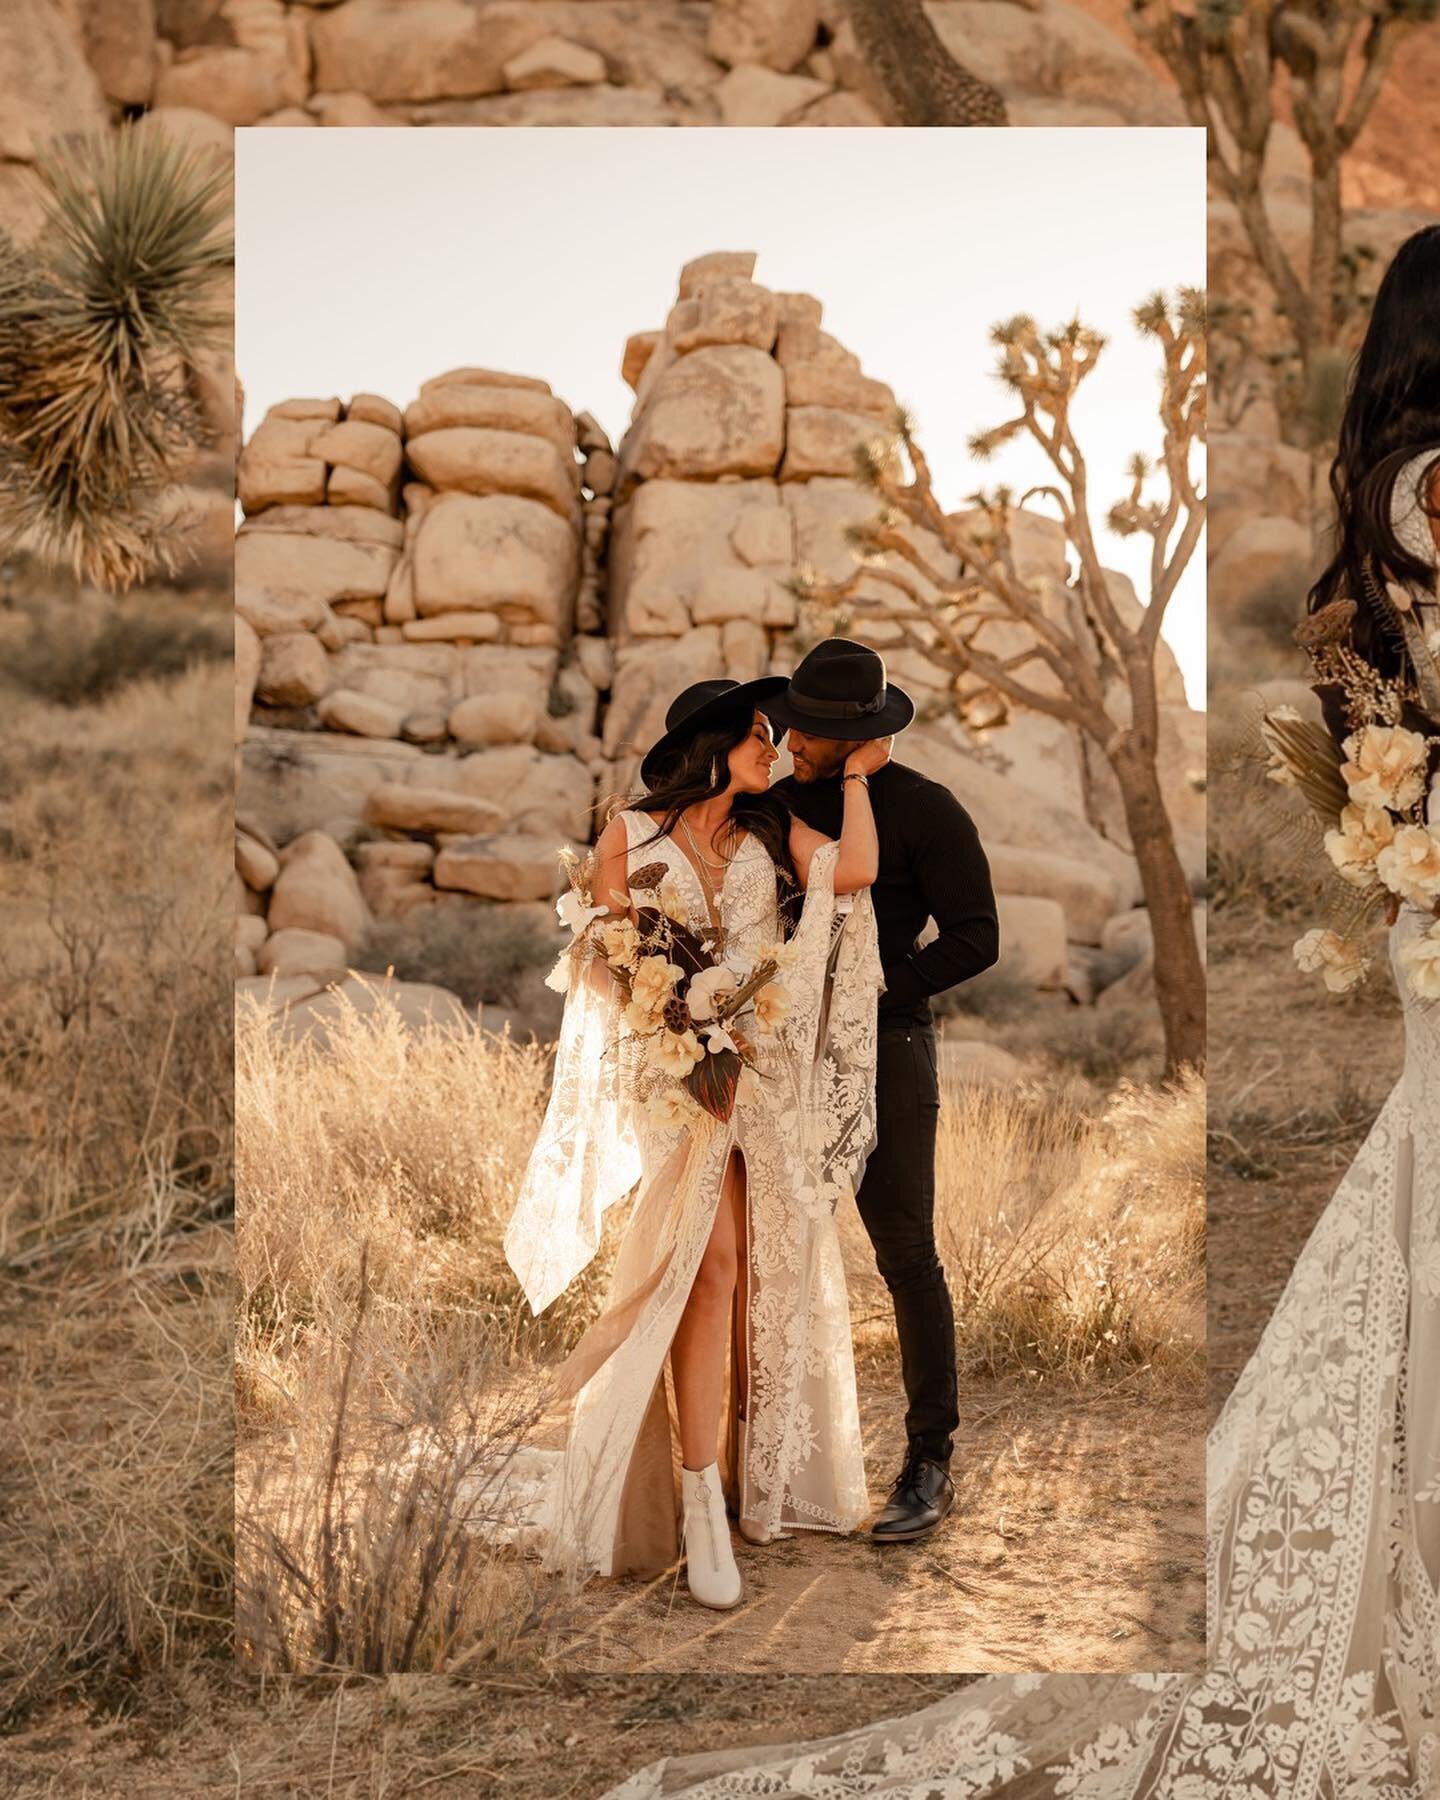 The way the lighting hit during this elopement☀️

I&rsquo;ve been counting down the months till I head back to California in August but for now I&rsquo;ll be home watching all the snow melt because Illinois is finally above 30 degrees👏🏼

#Joshuatre